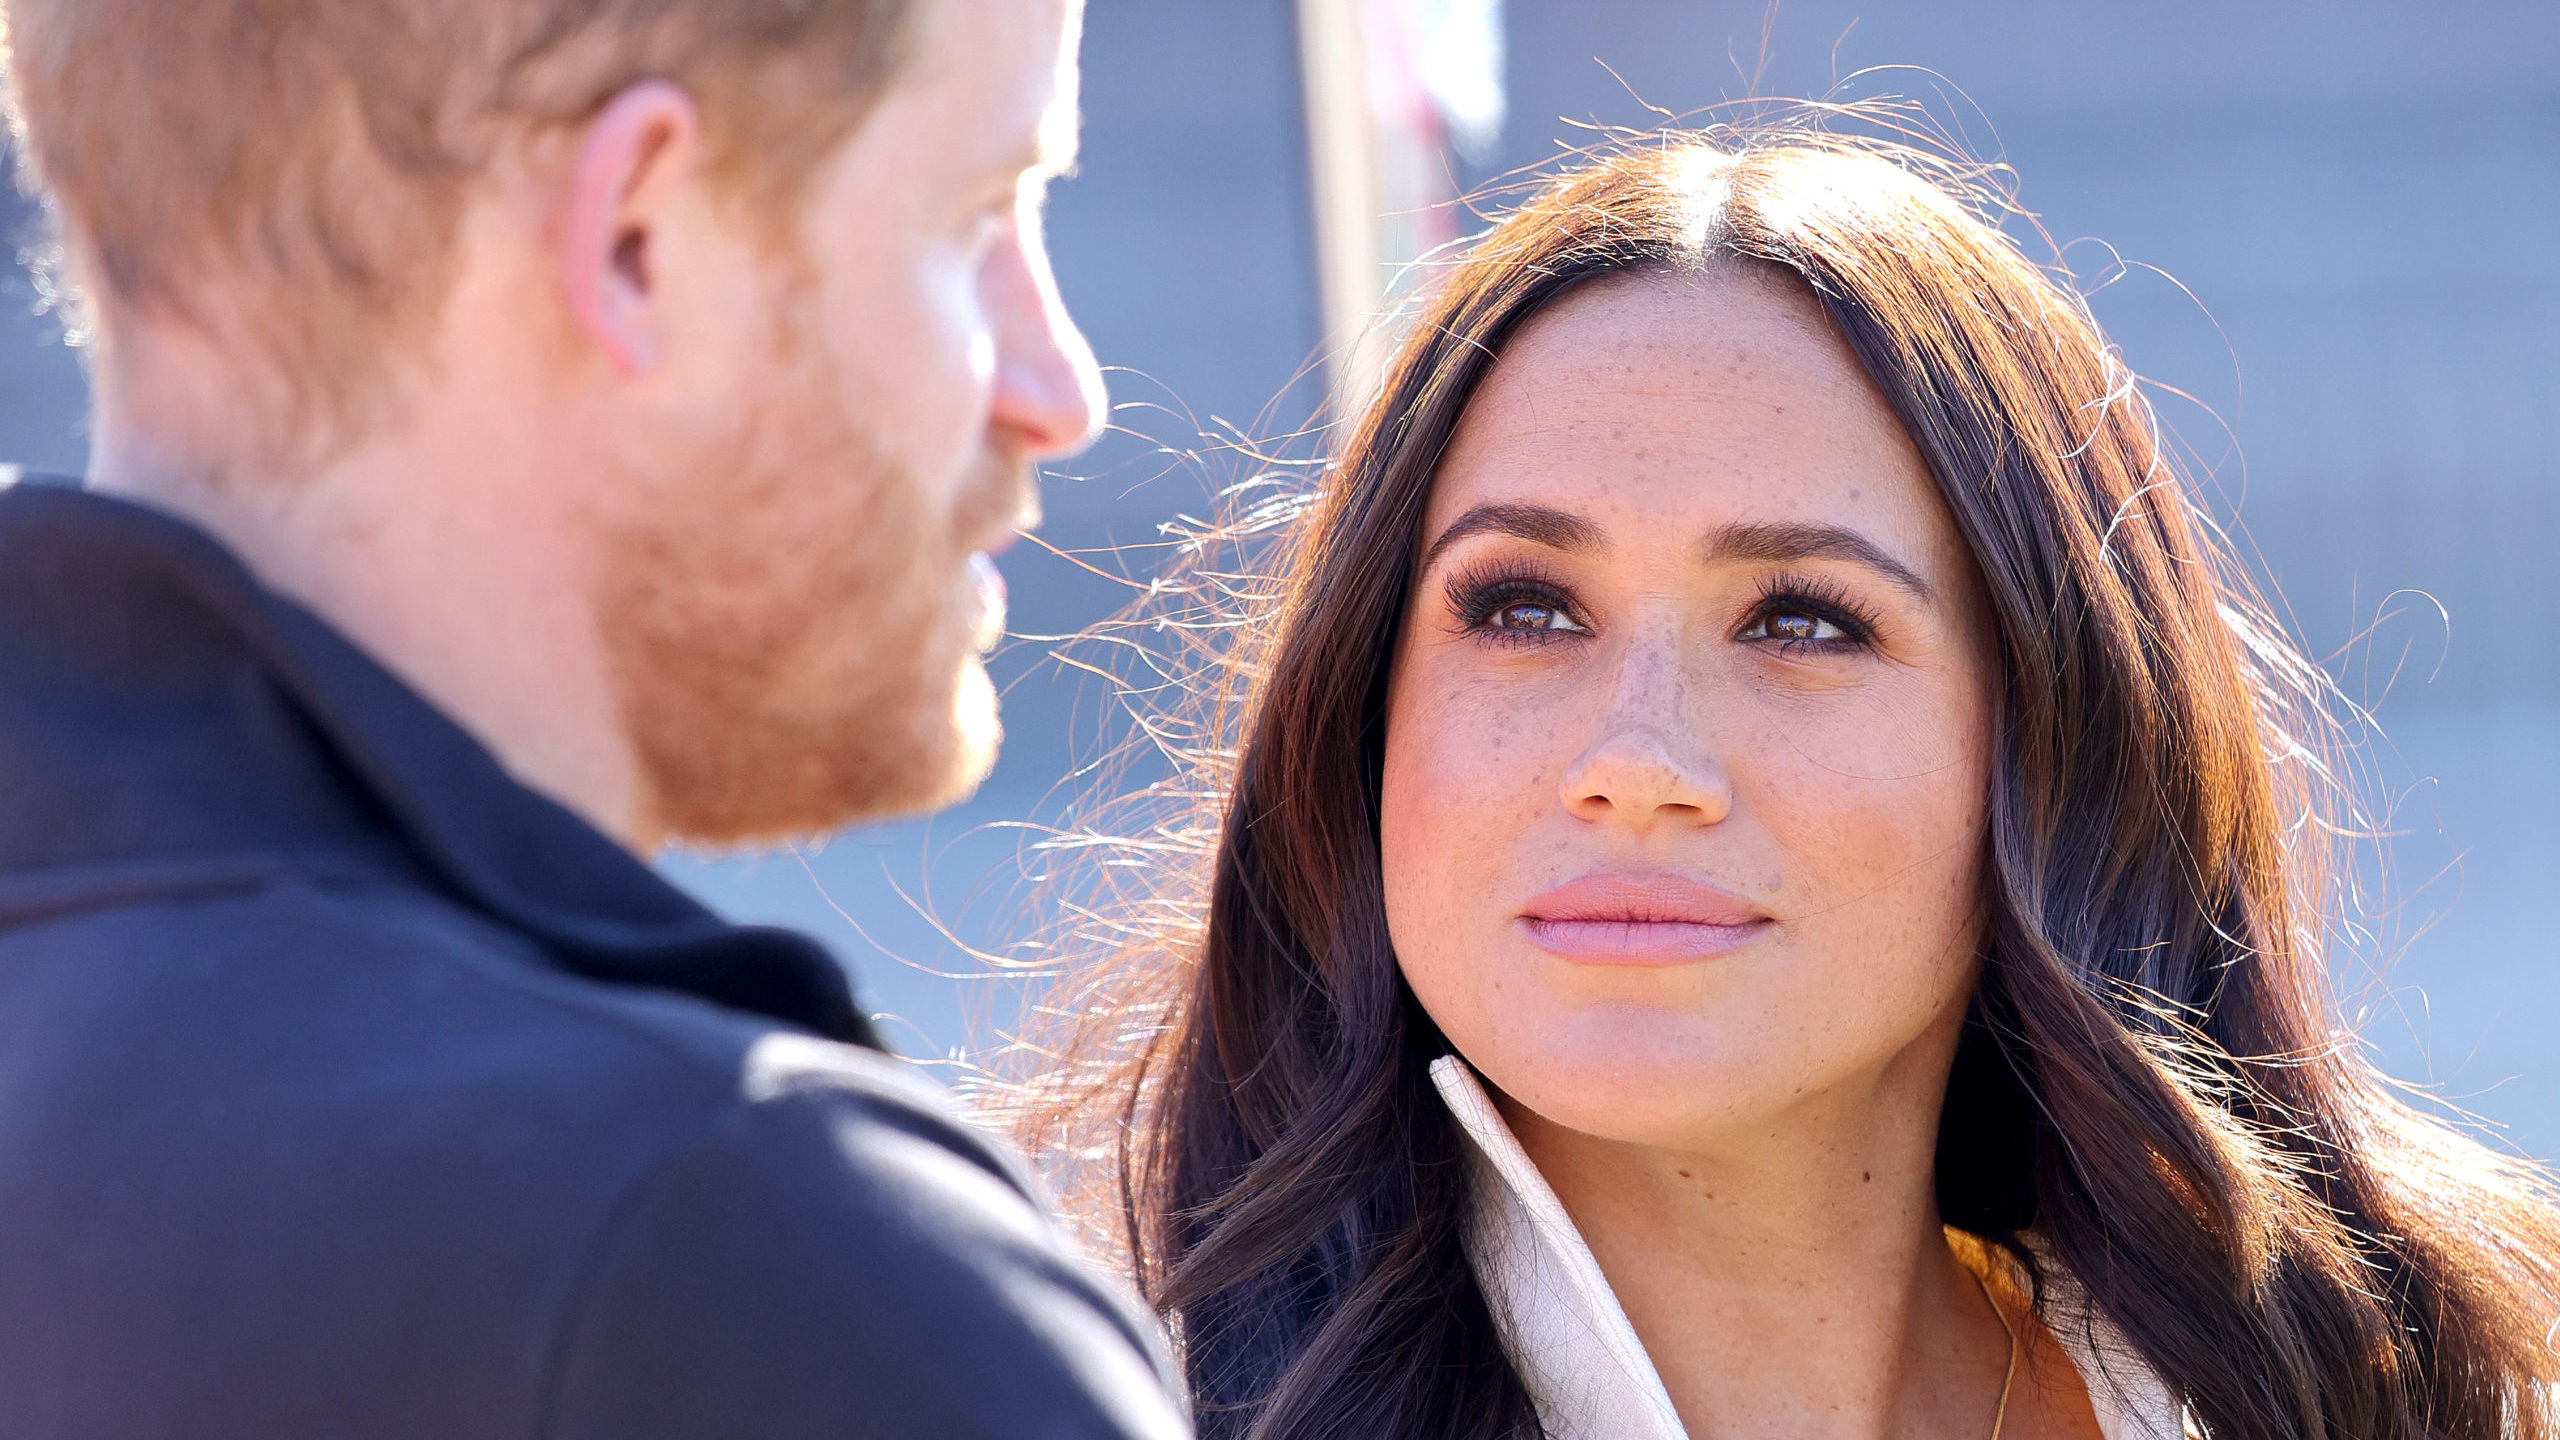 About to return to the UK, Meghan Markle gives another scandalous interview